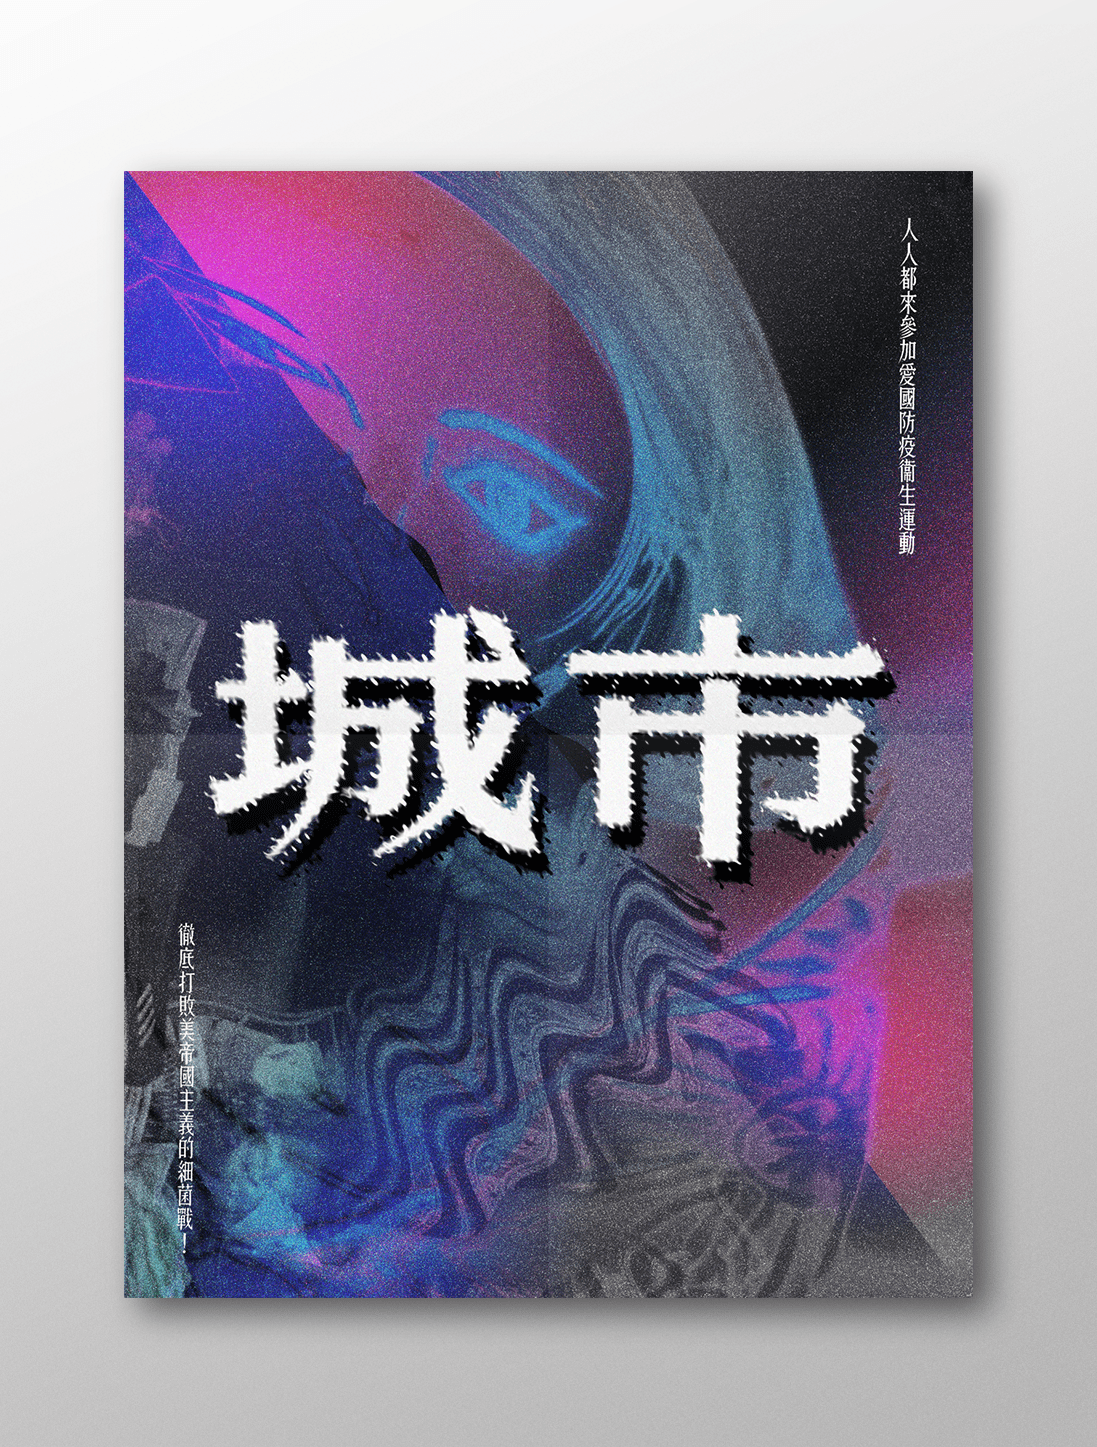 Critical Design japanese anime Image making Image distortion google search random design style daily poster Layout Fun personal gradient photoshop